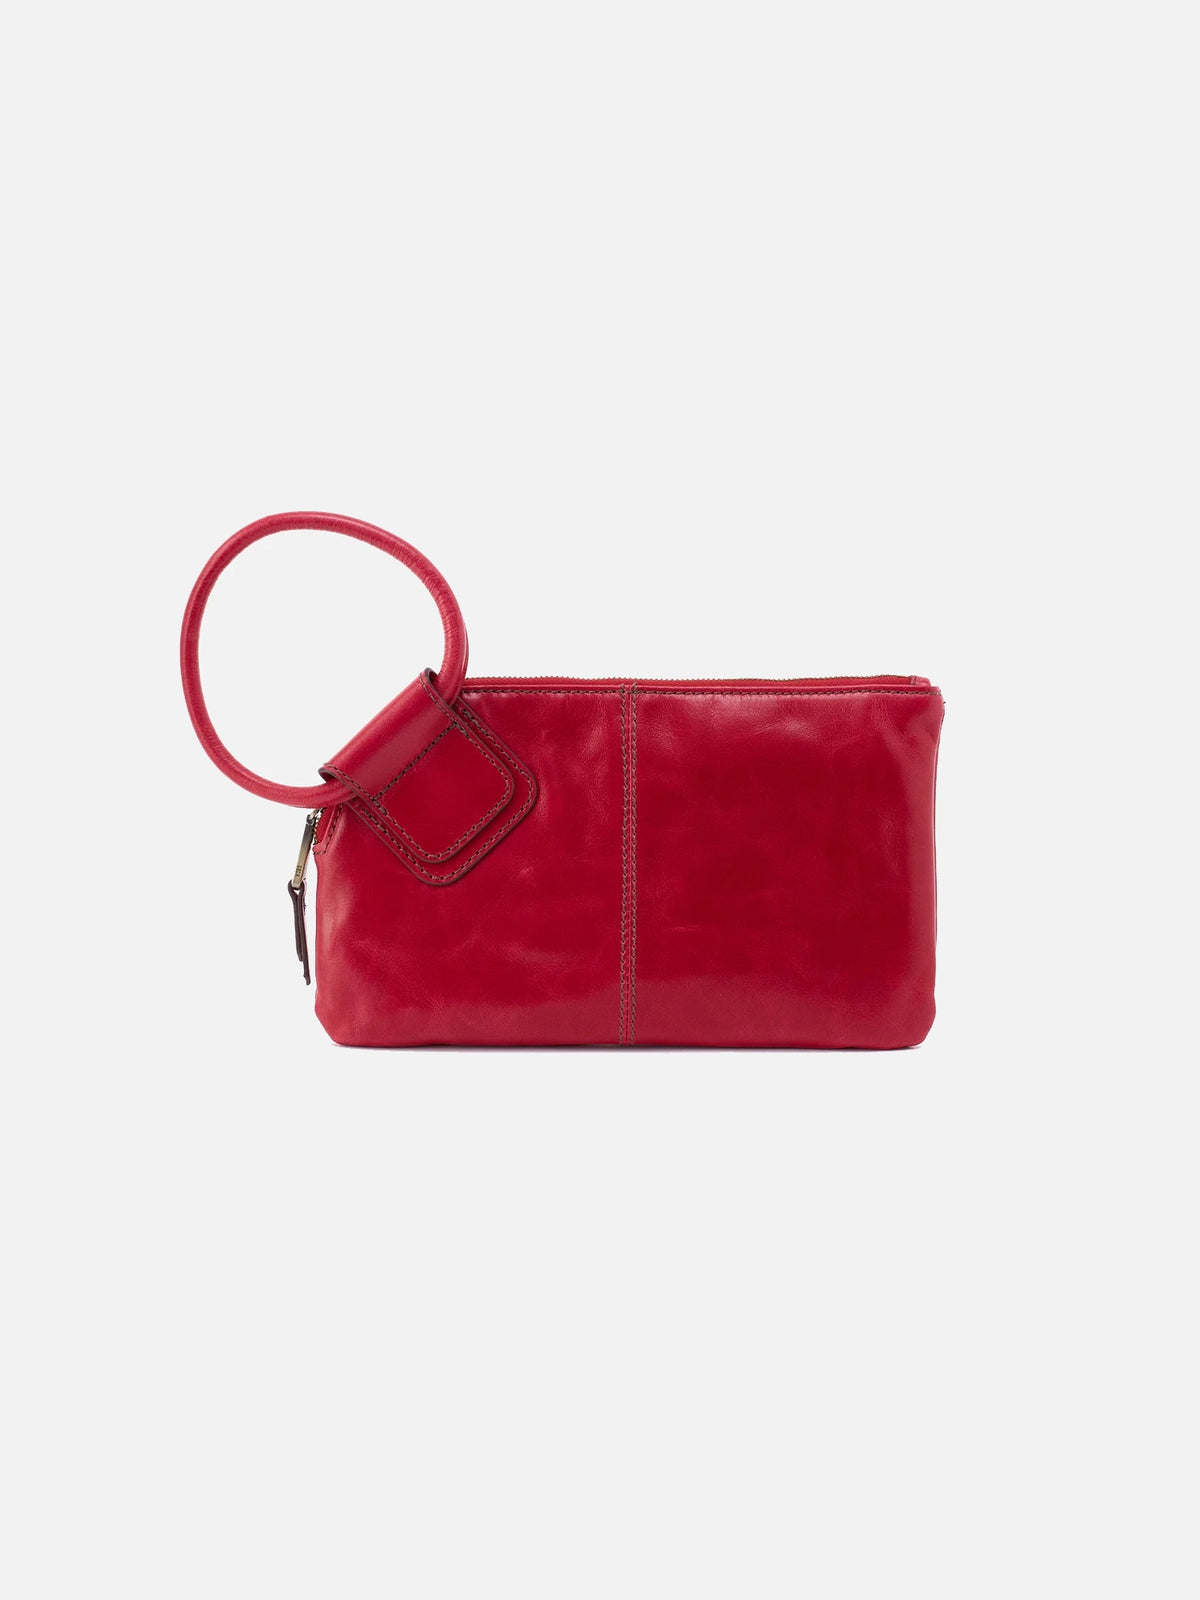 hobo sable wristlet in claret red polished leather